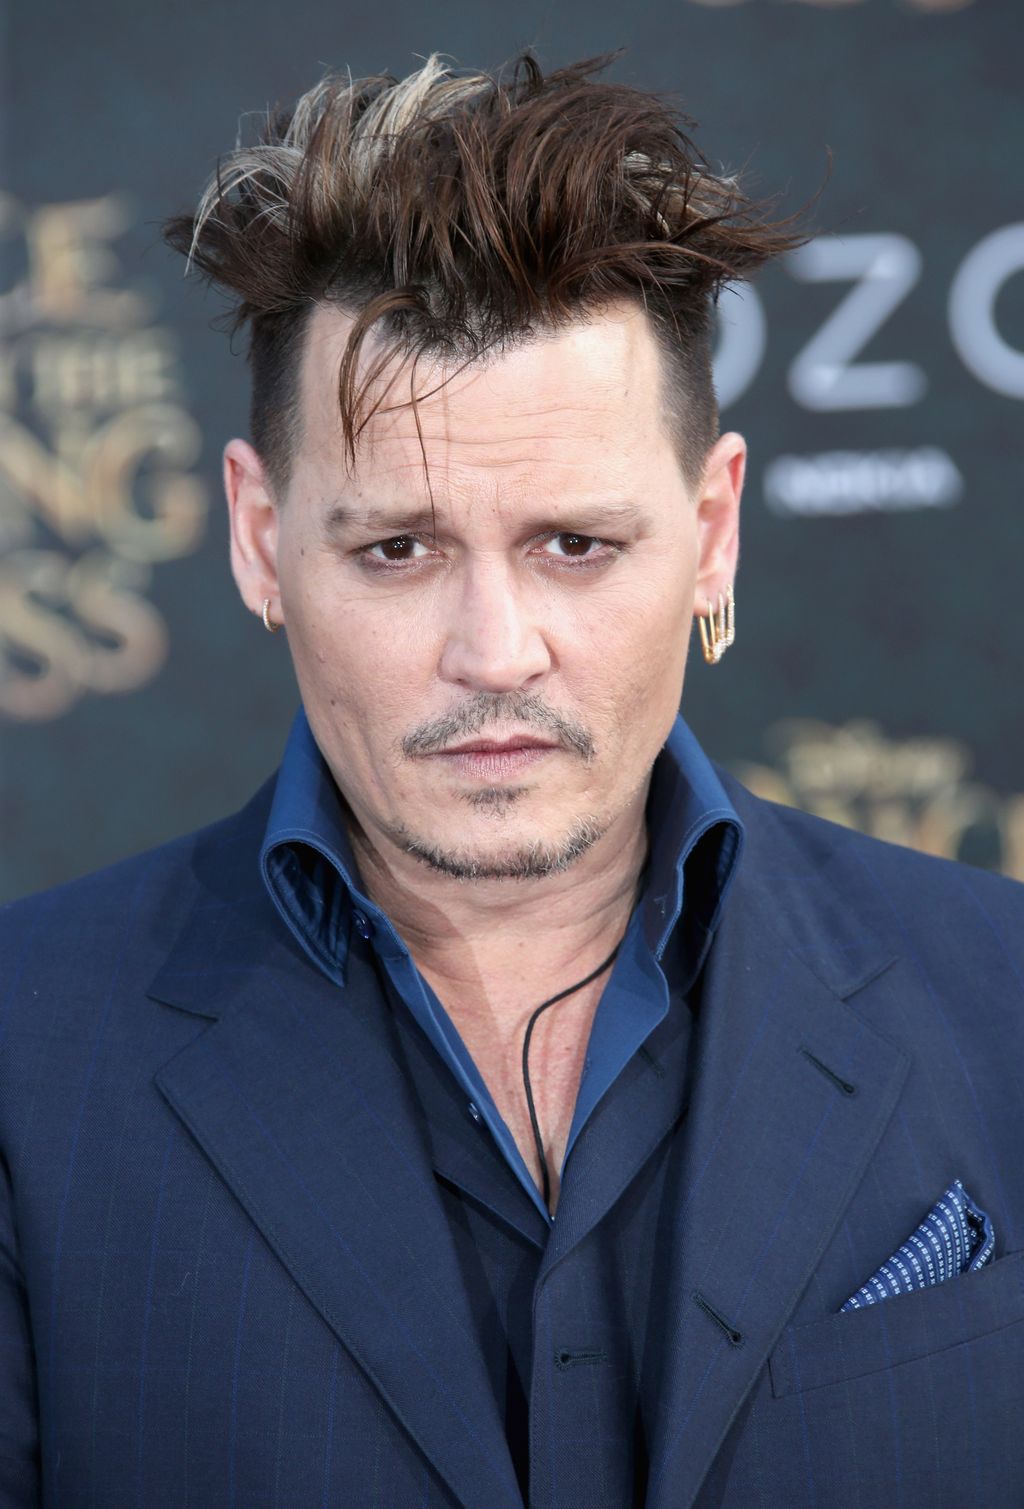 HOLLYWOOD, CA - MAY 23:  Actor Johnny Depp attends the premiere of Disney's 